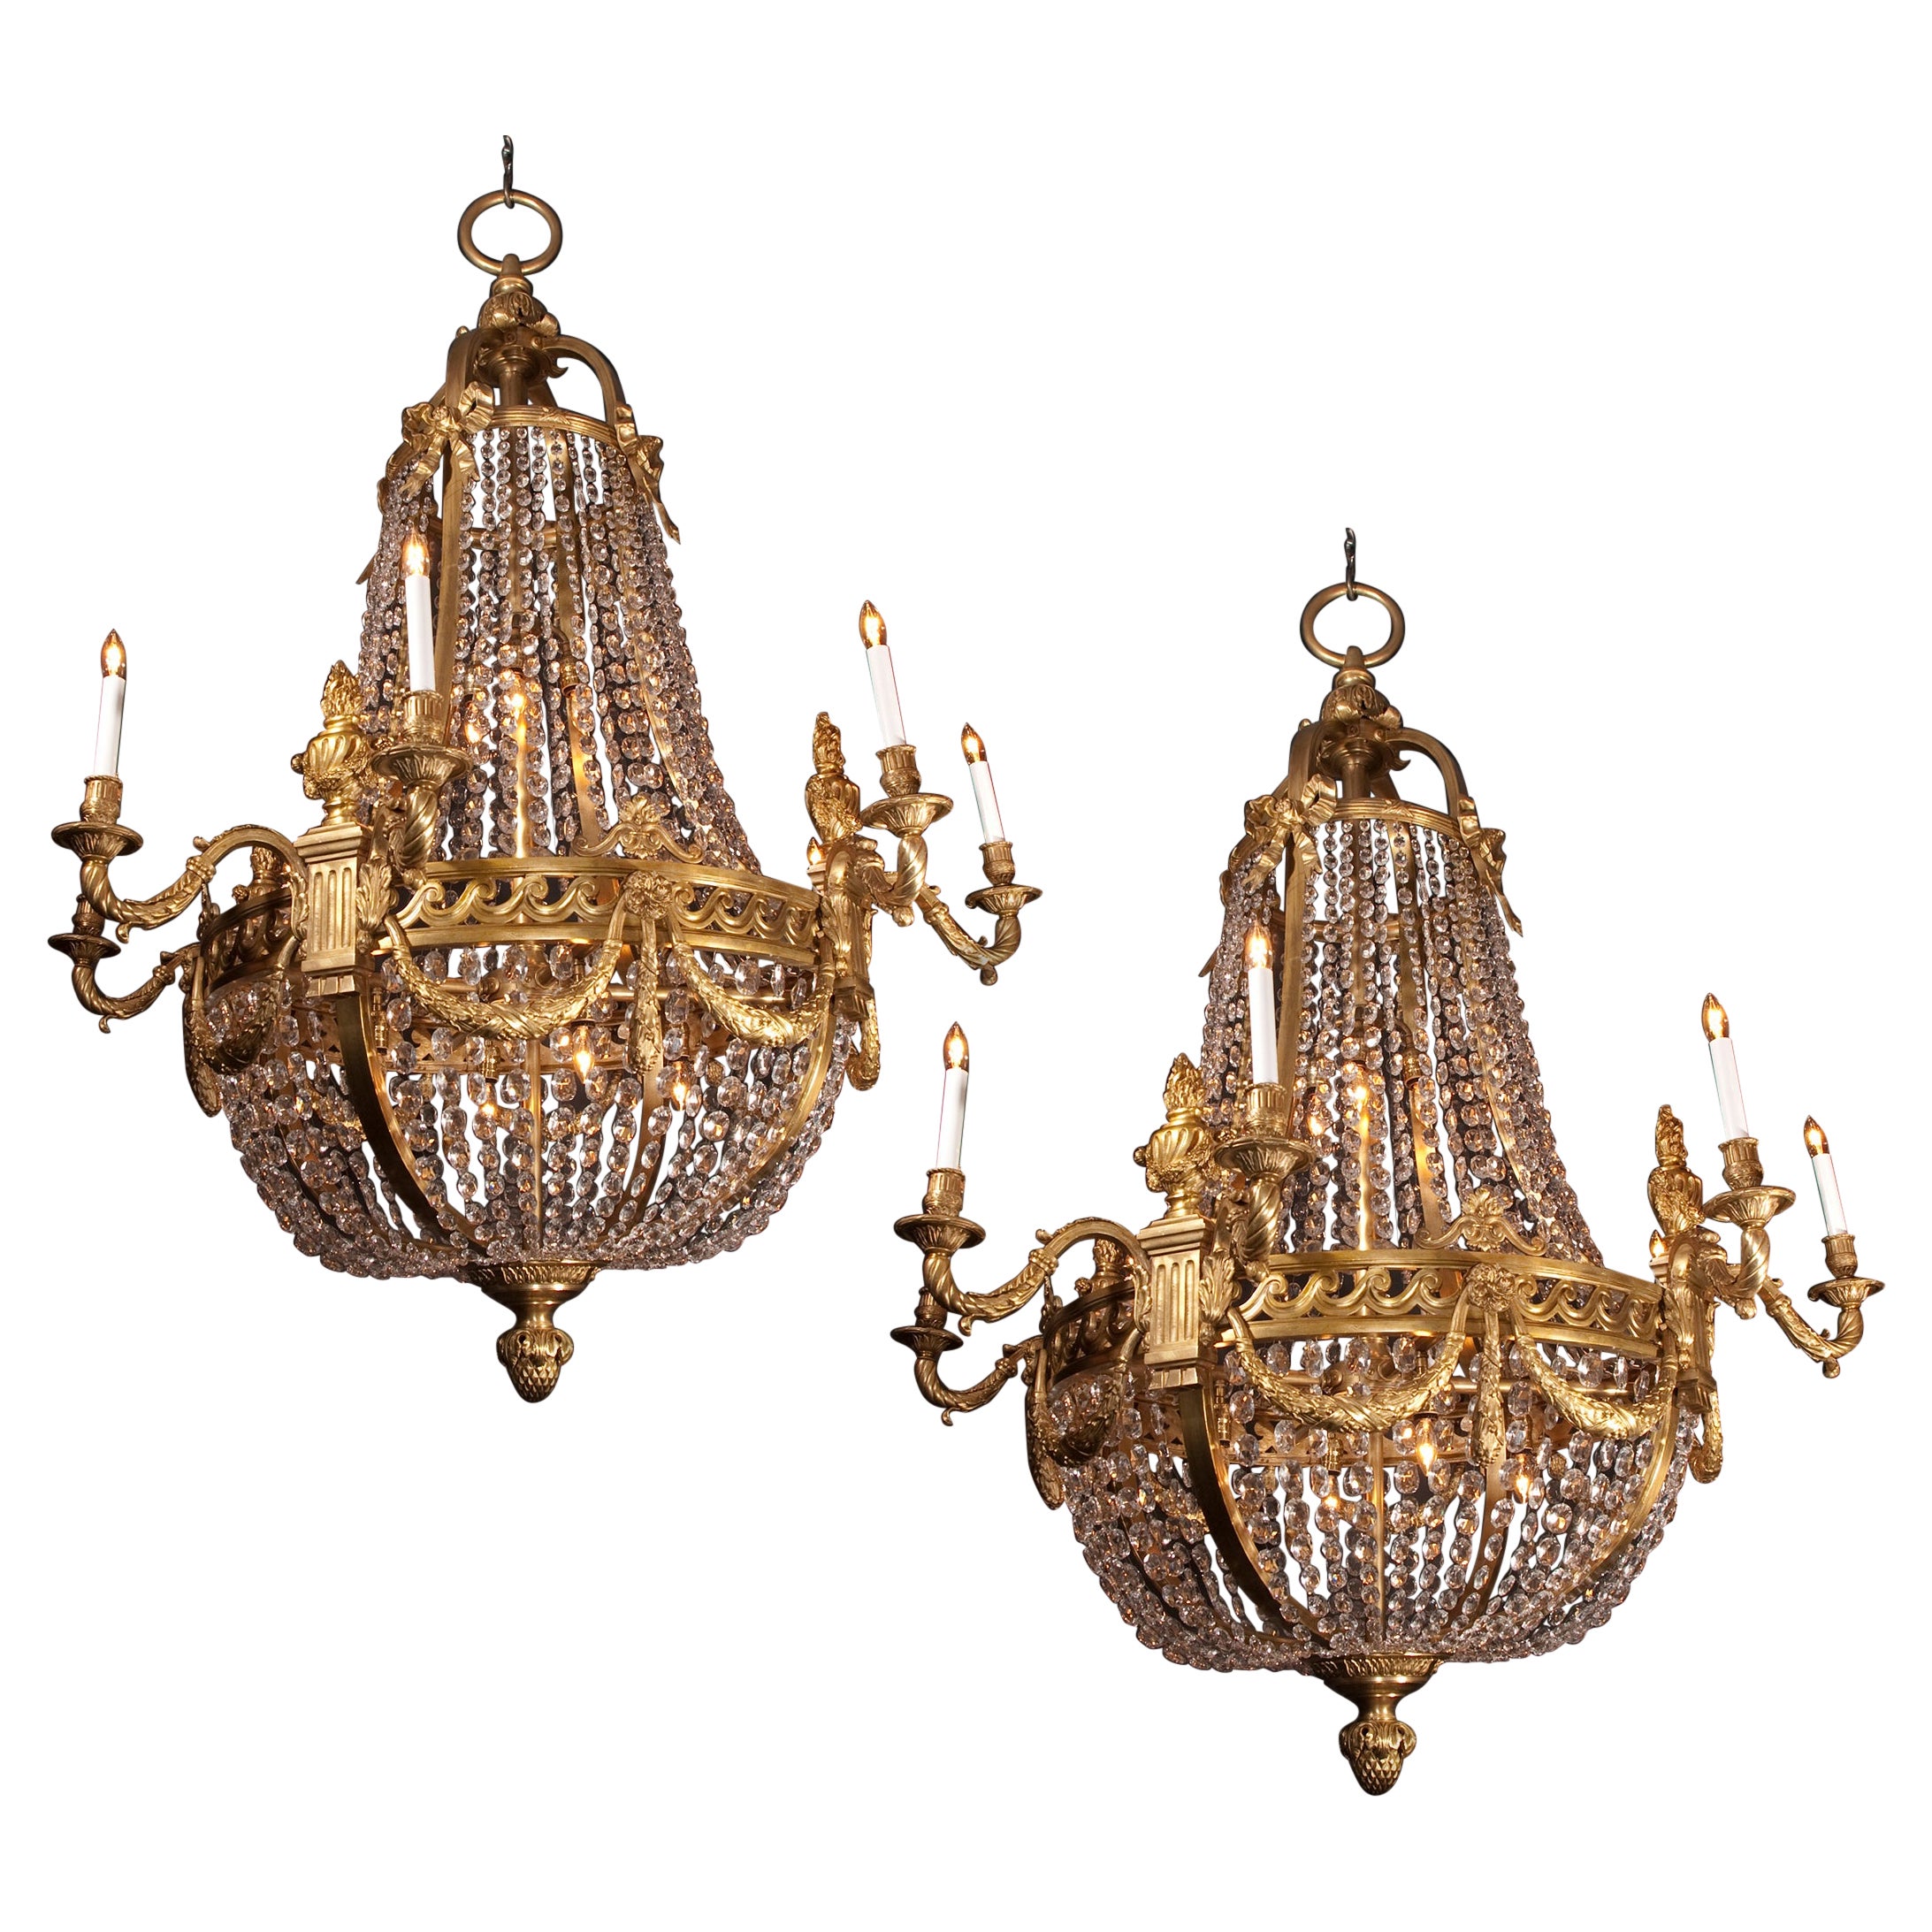 Pair of Large, Grand Louis XVI Bronze & Crystal Chandeliers, 19th Century French